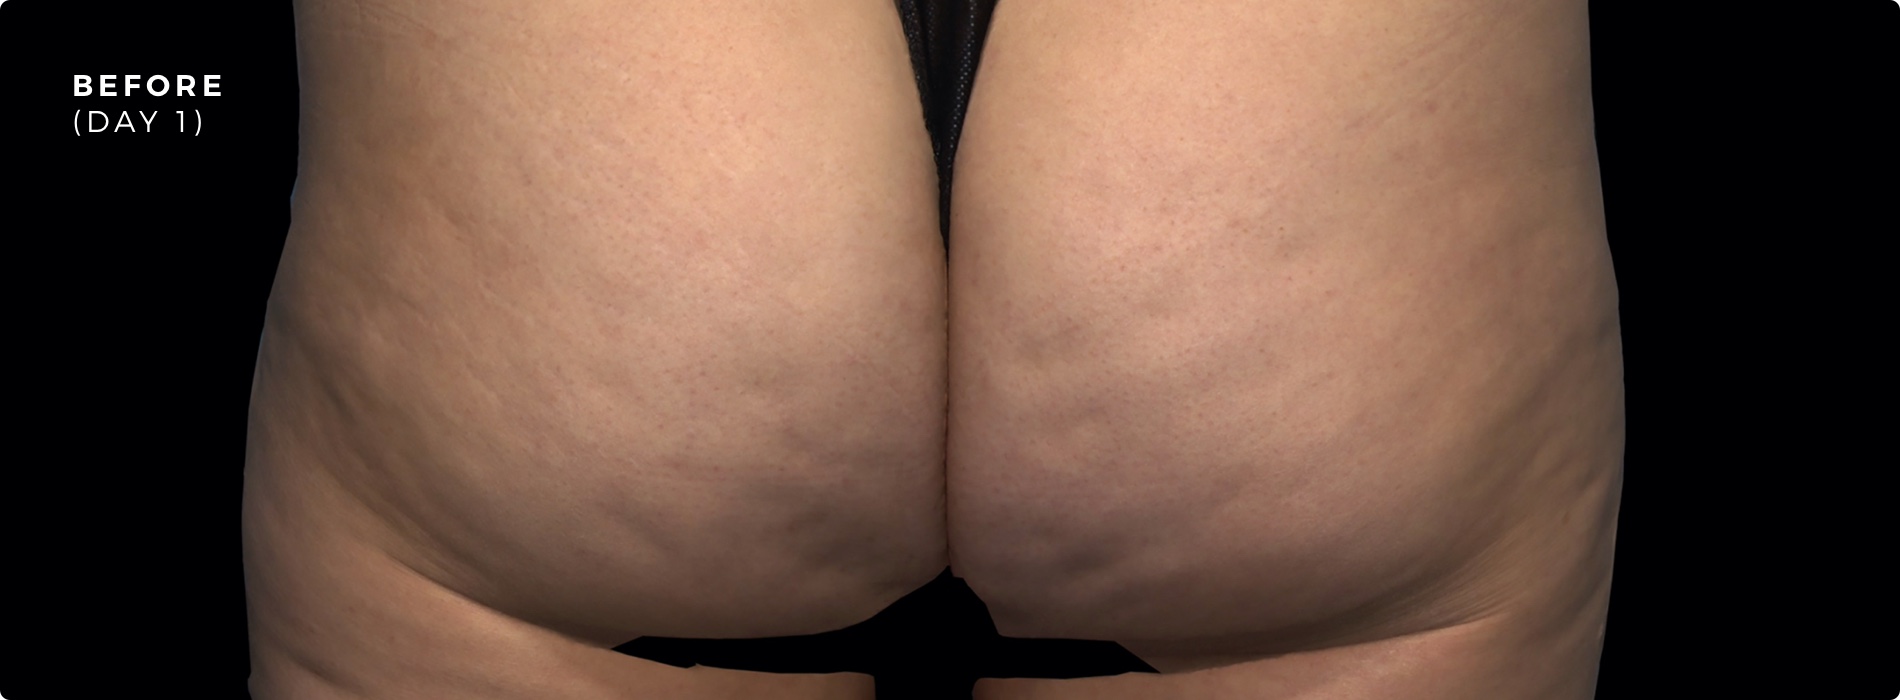 Qwo Cellulite Injection - Before